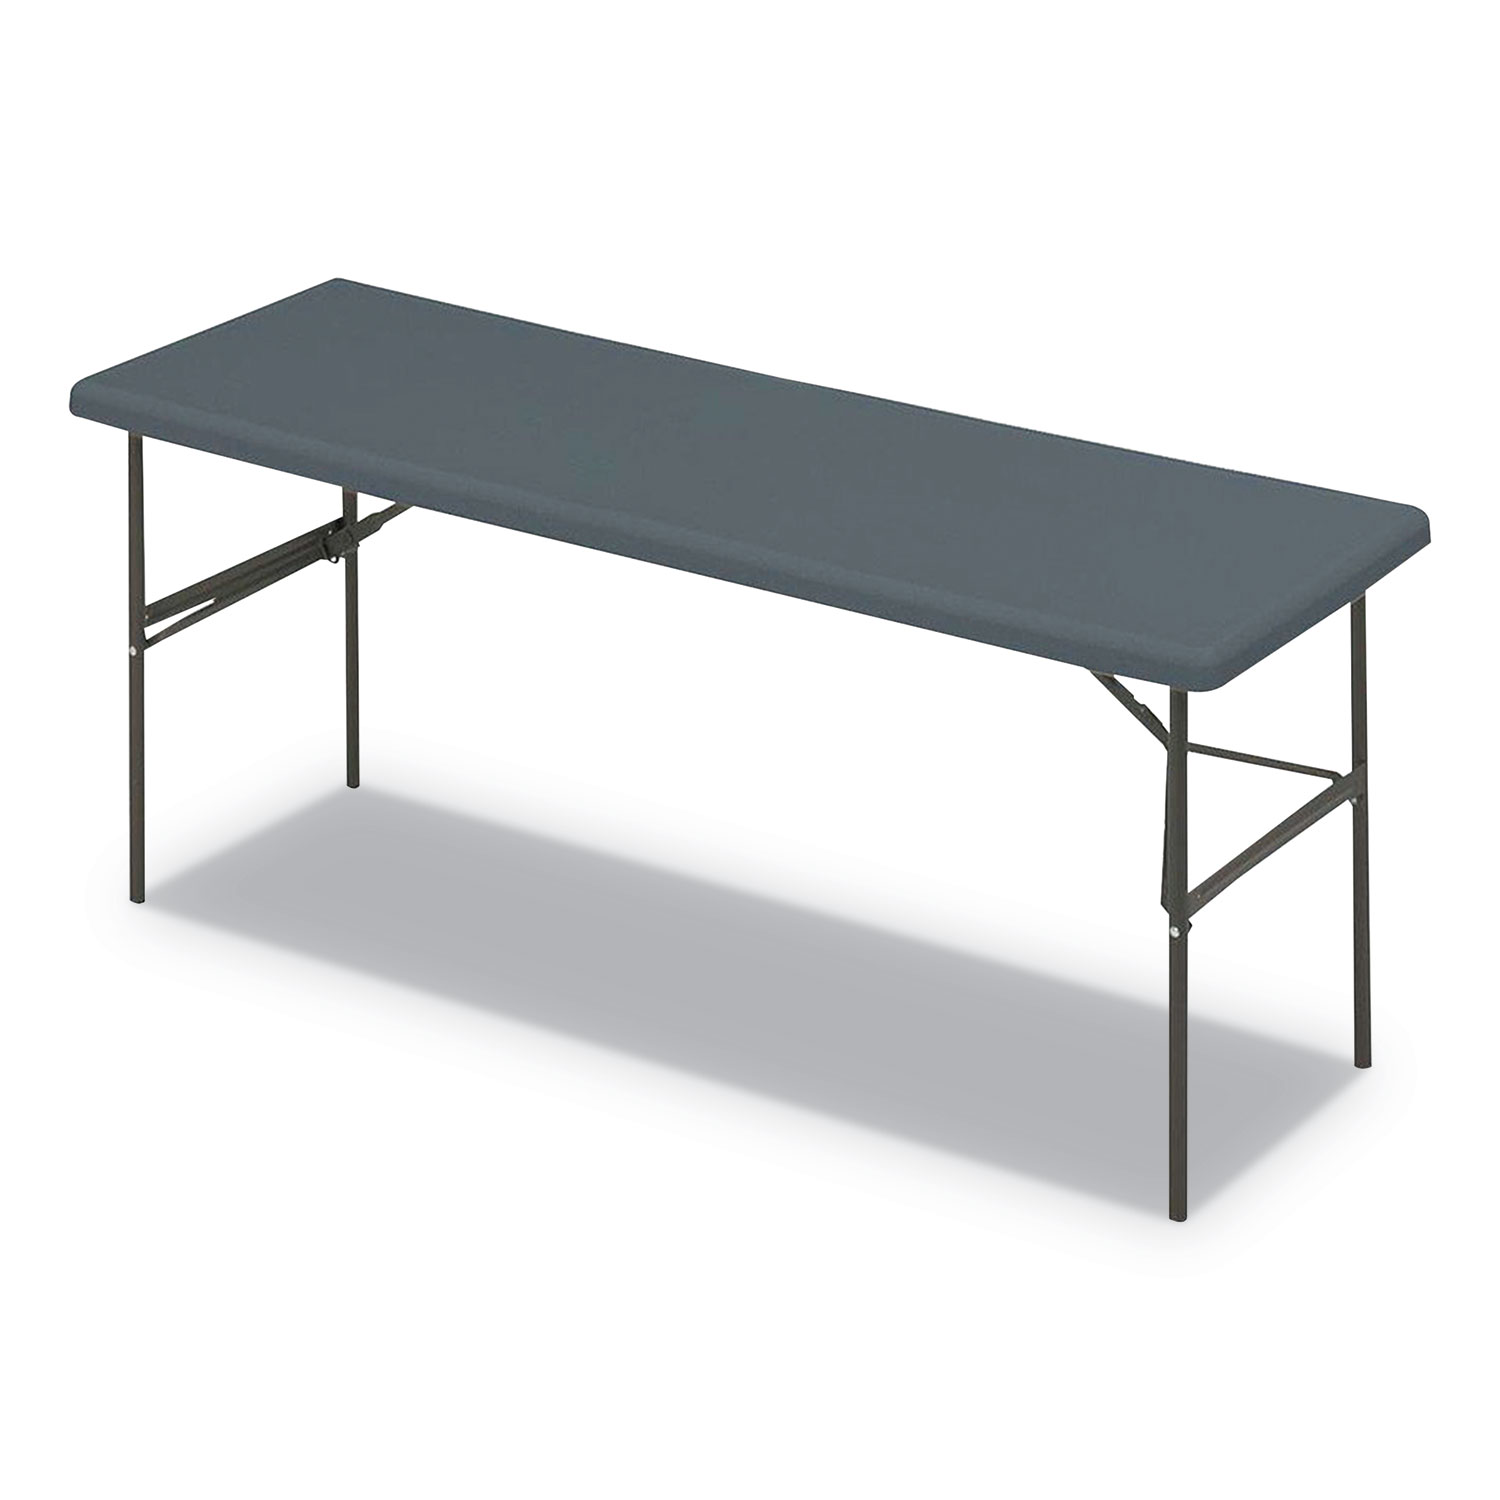 IndestrucTable Classic Folding Table, Rectangular, 72" x 24" x 29", Charcoal